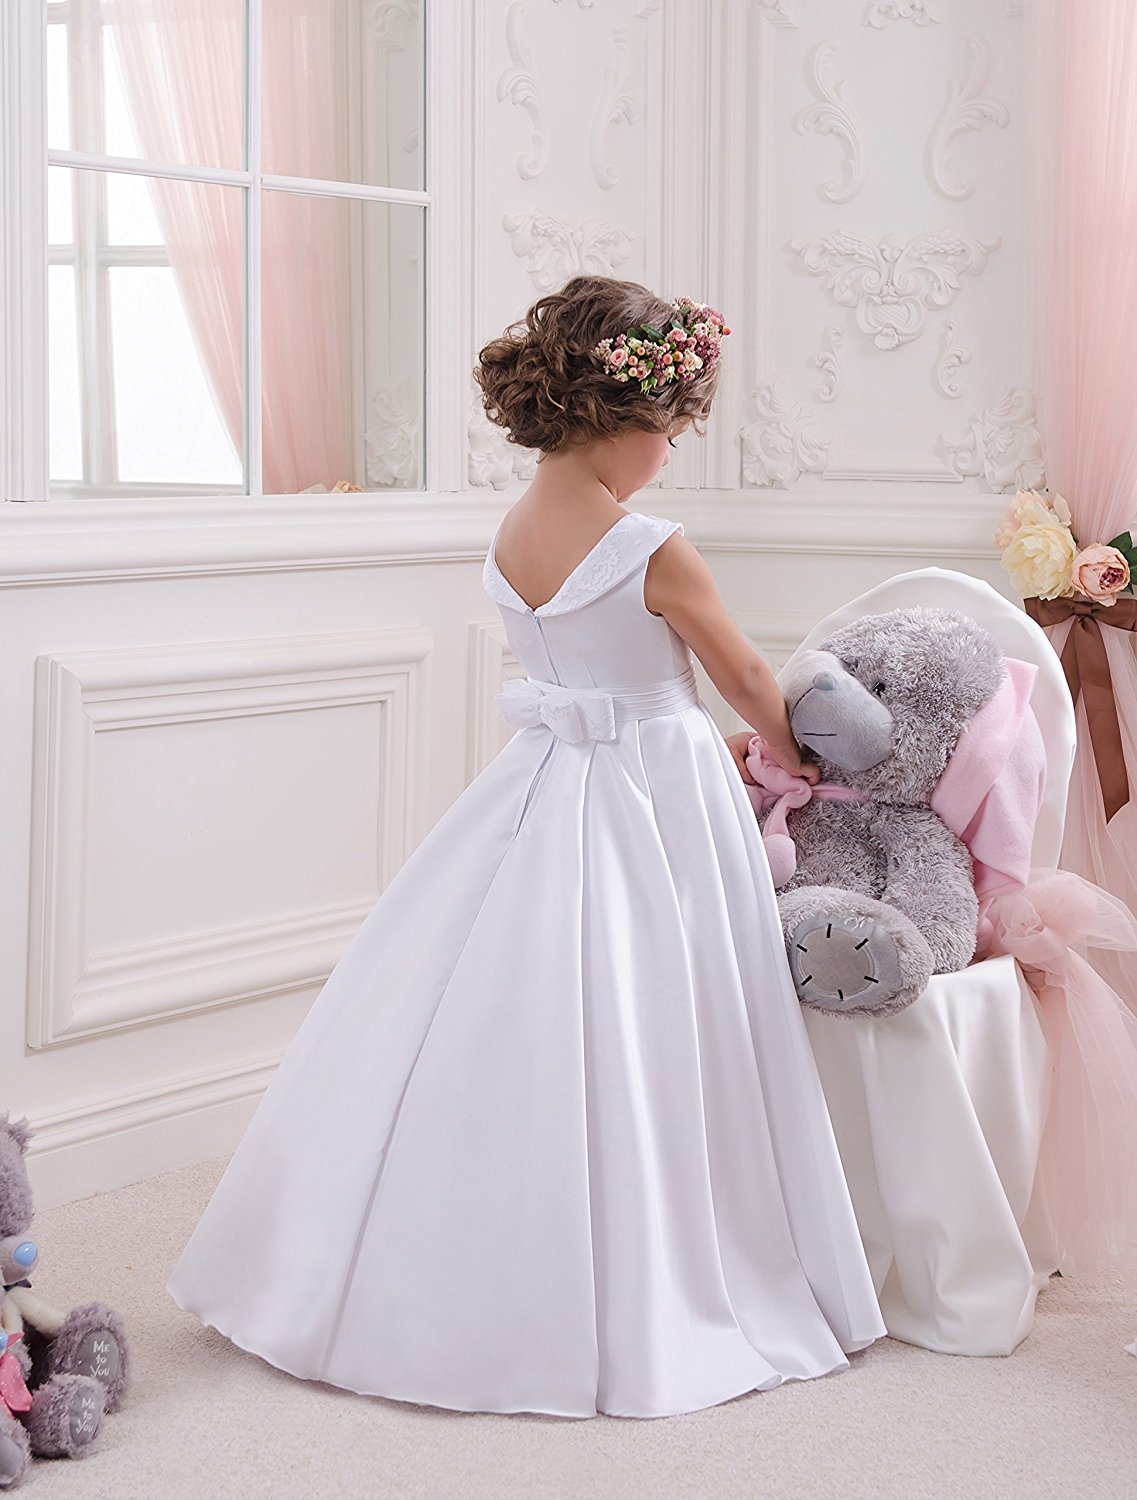 Princess / Ball Gown Sweep / Brush Train Wedding / Party Flower Girl Dresses  - Sequined Short Sleeve Off Shoulder With Bow(S) / Pleats | Princess ball  gowns, Girls ball gown, Girls dresses